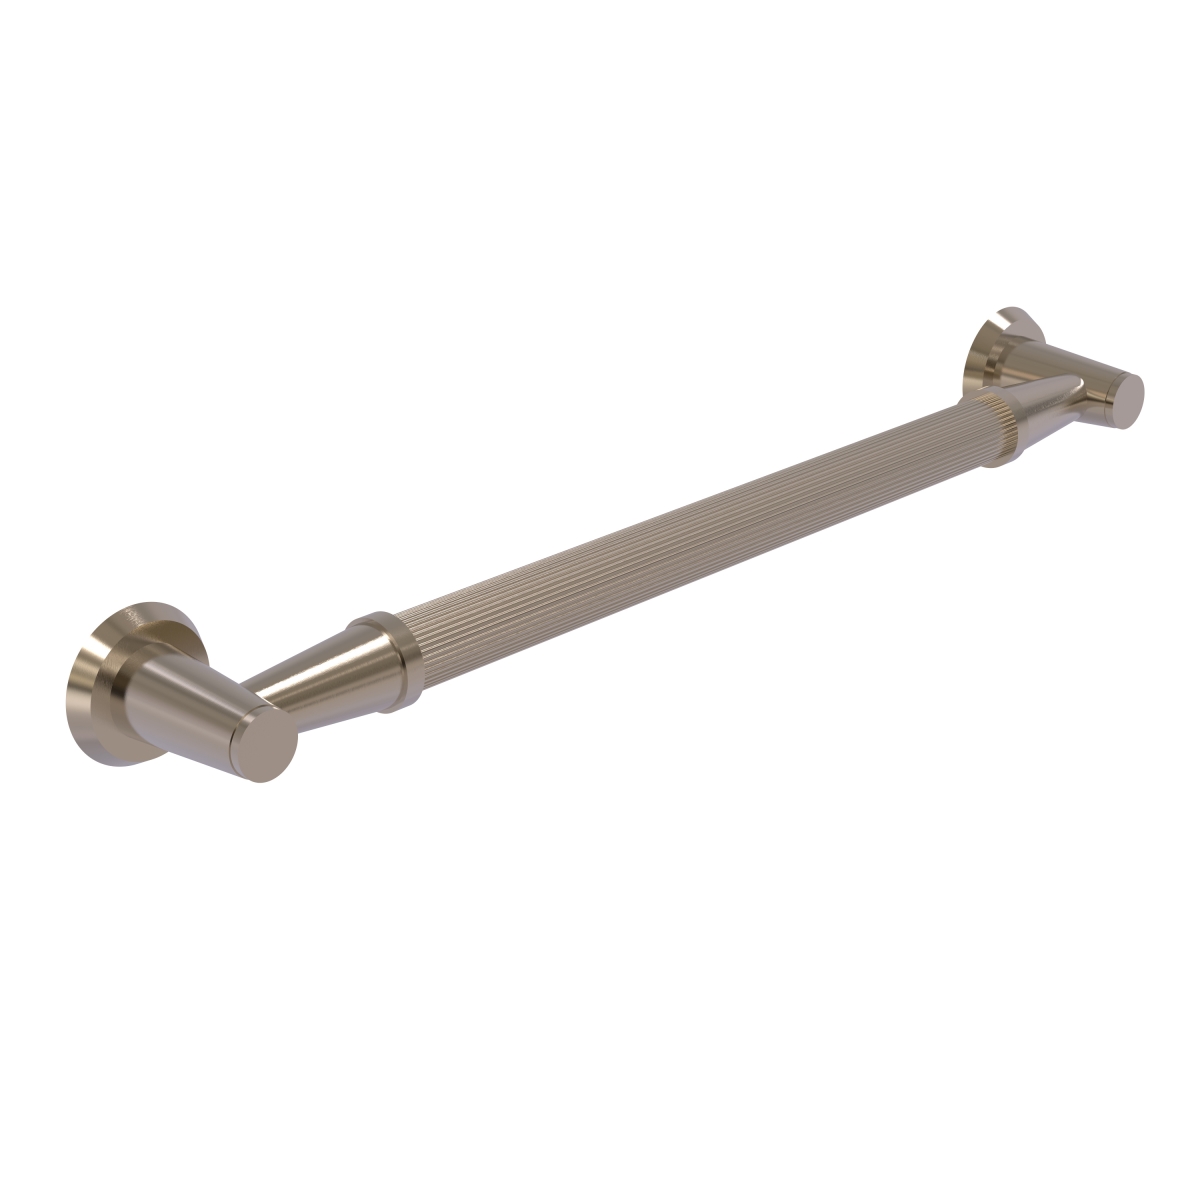 Picture of Allied Brass MD-GRR-32-PEW 32 in. Reeded Grab Bar, Antique Pewter - 3.5 x 34 x 32 in.